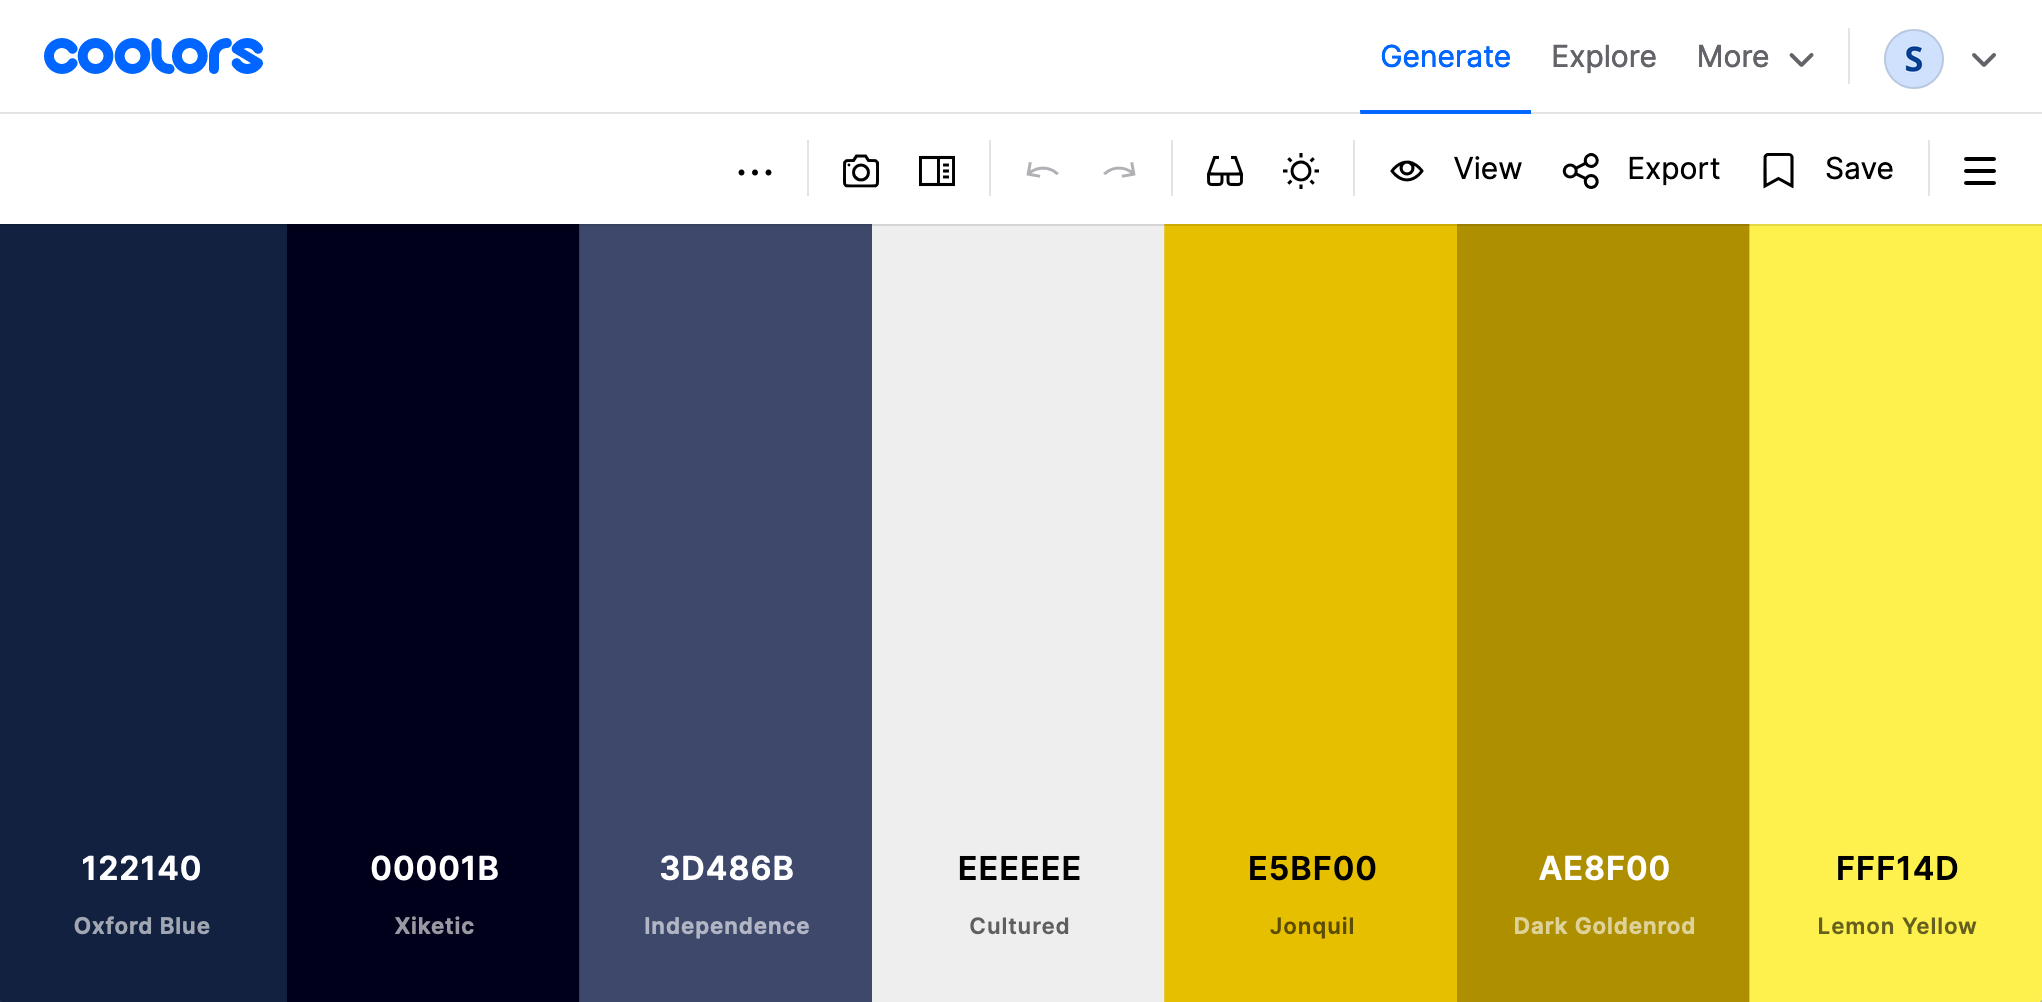 My palette saved in Coolors, featuring a navy blue primary color with a darker and lighter variant, a gold secondary color also with variants, and a neutral off-white color between them